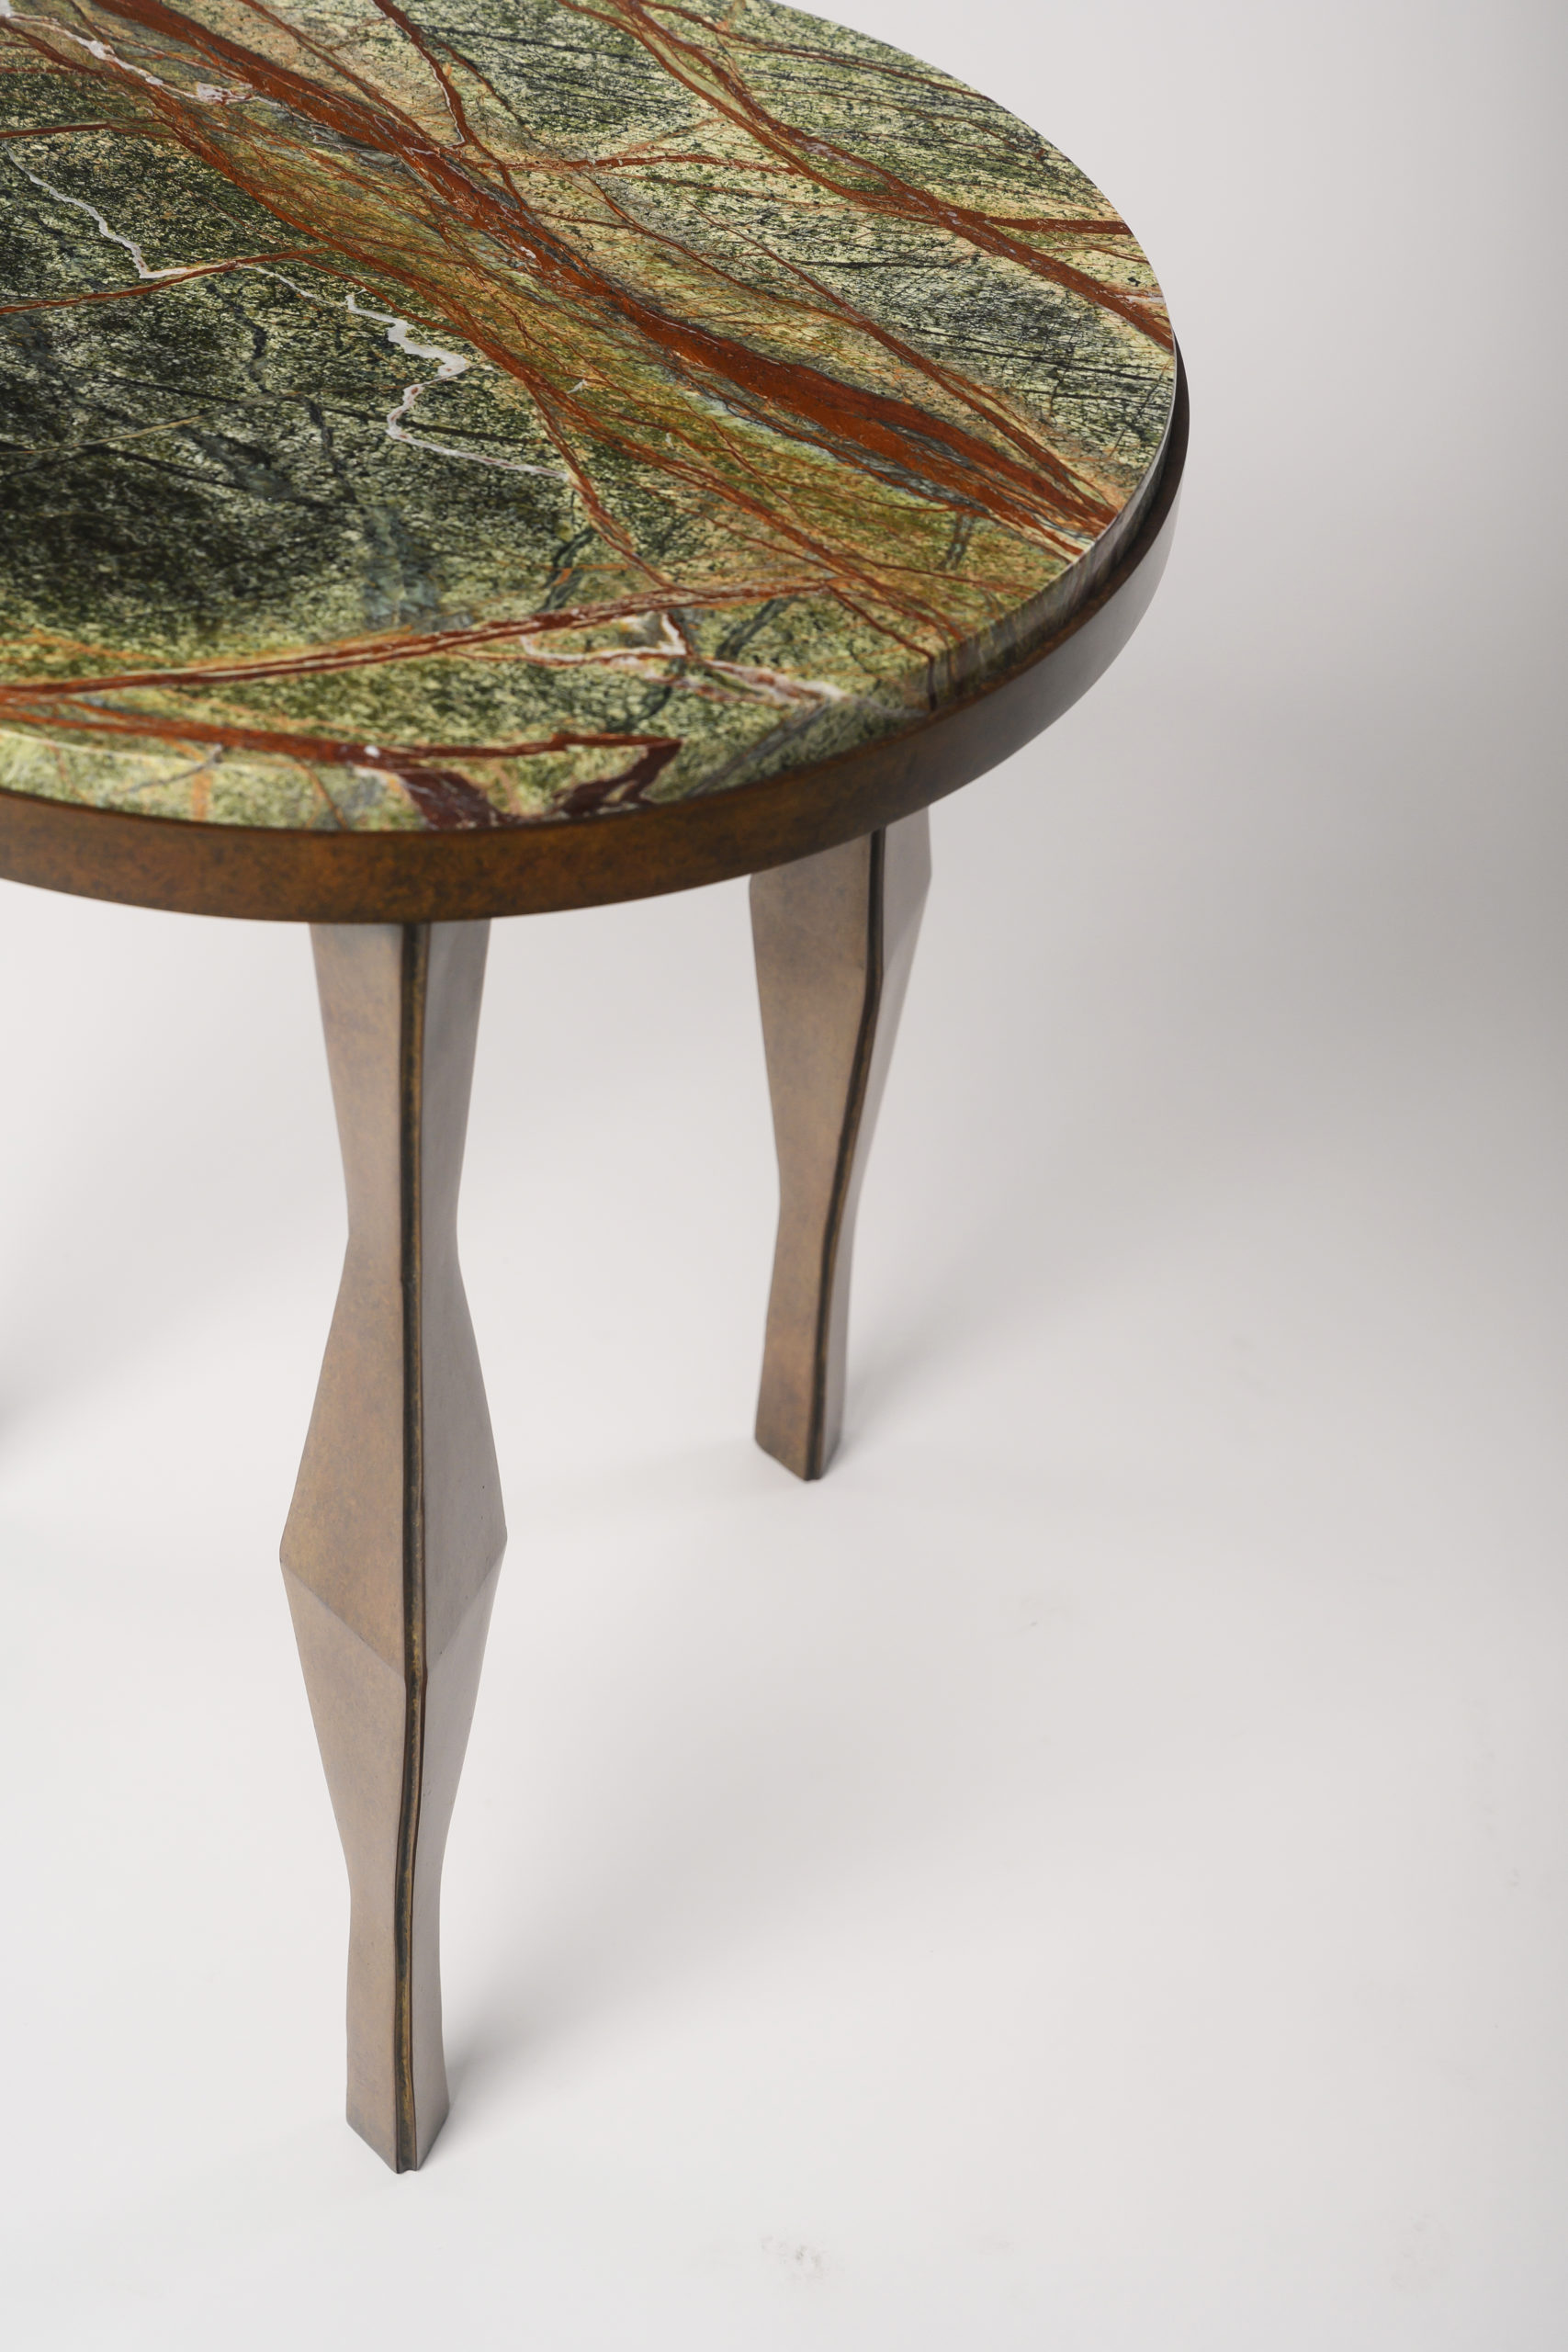 NYDC_WNWN_products_david_sutherland_Arthur_side_table_BEE_4974